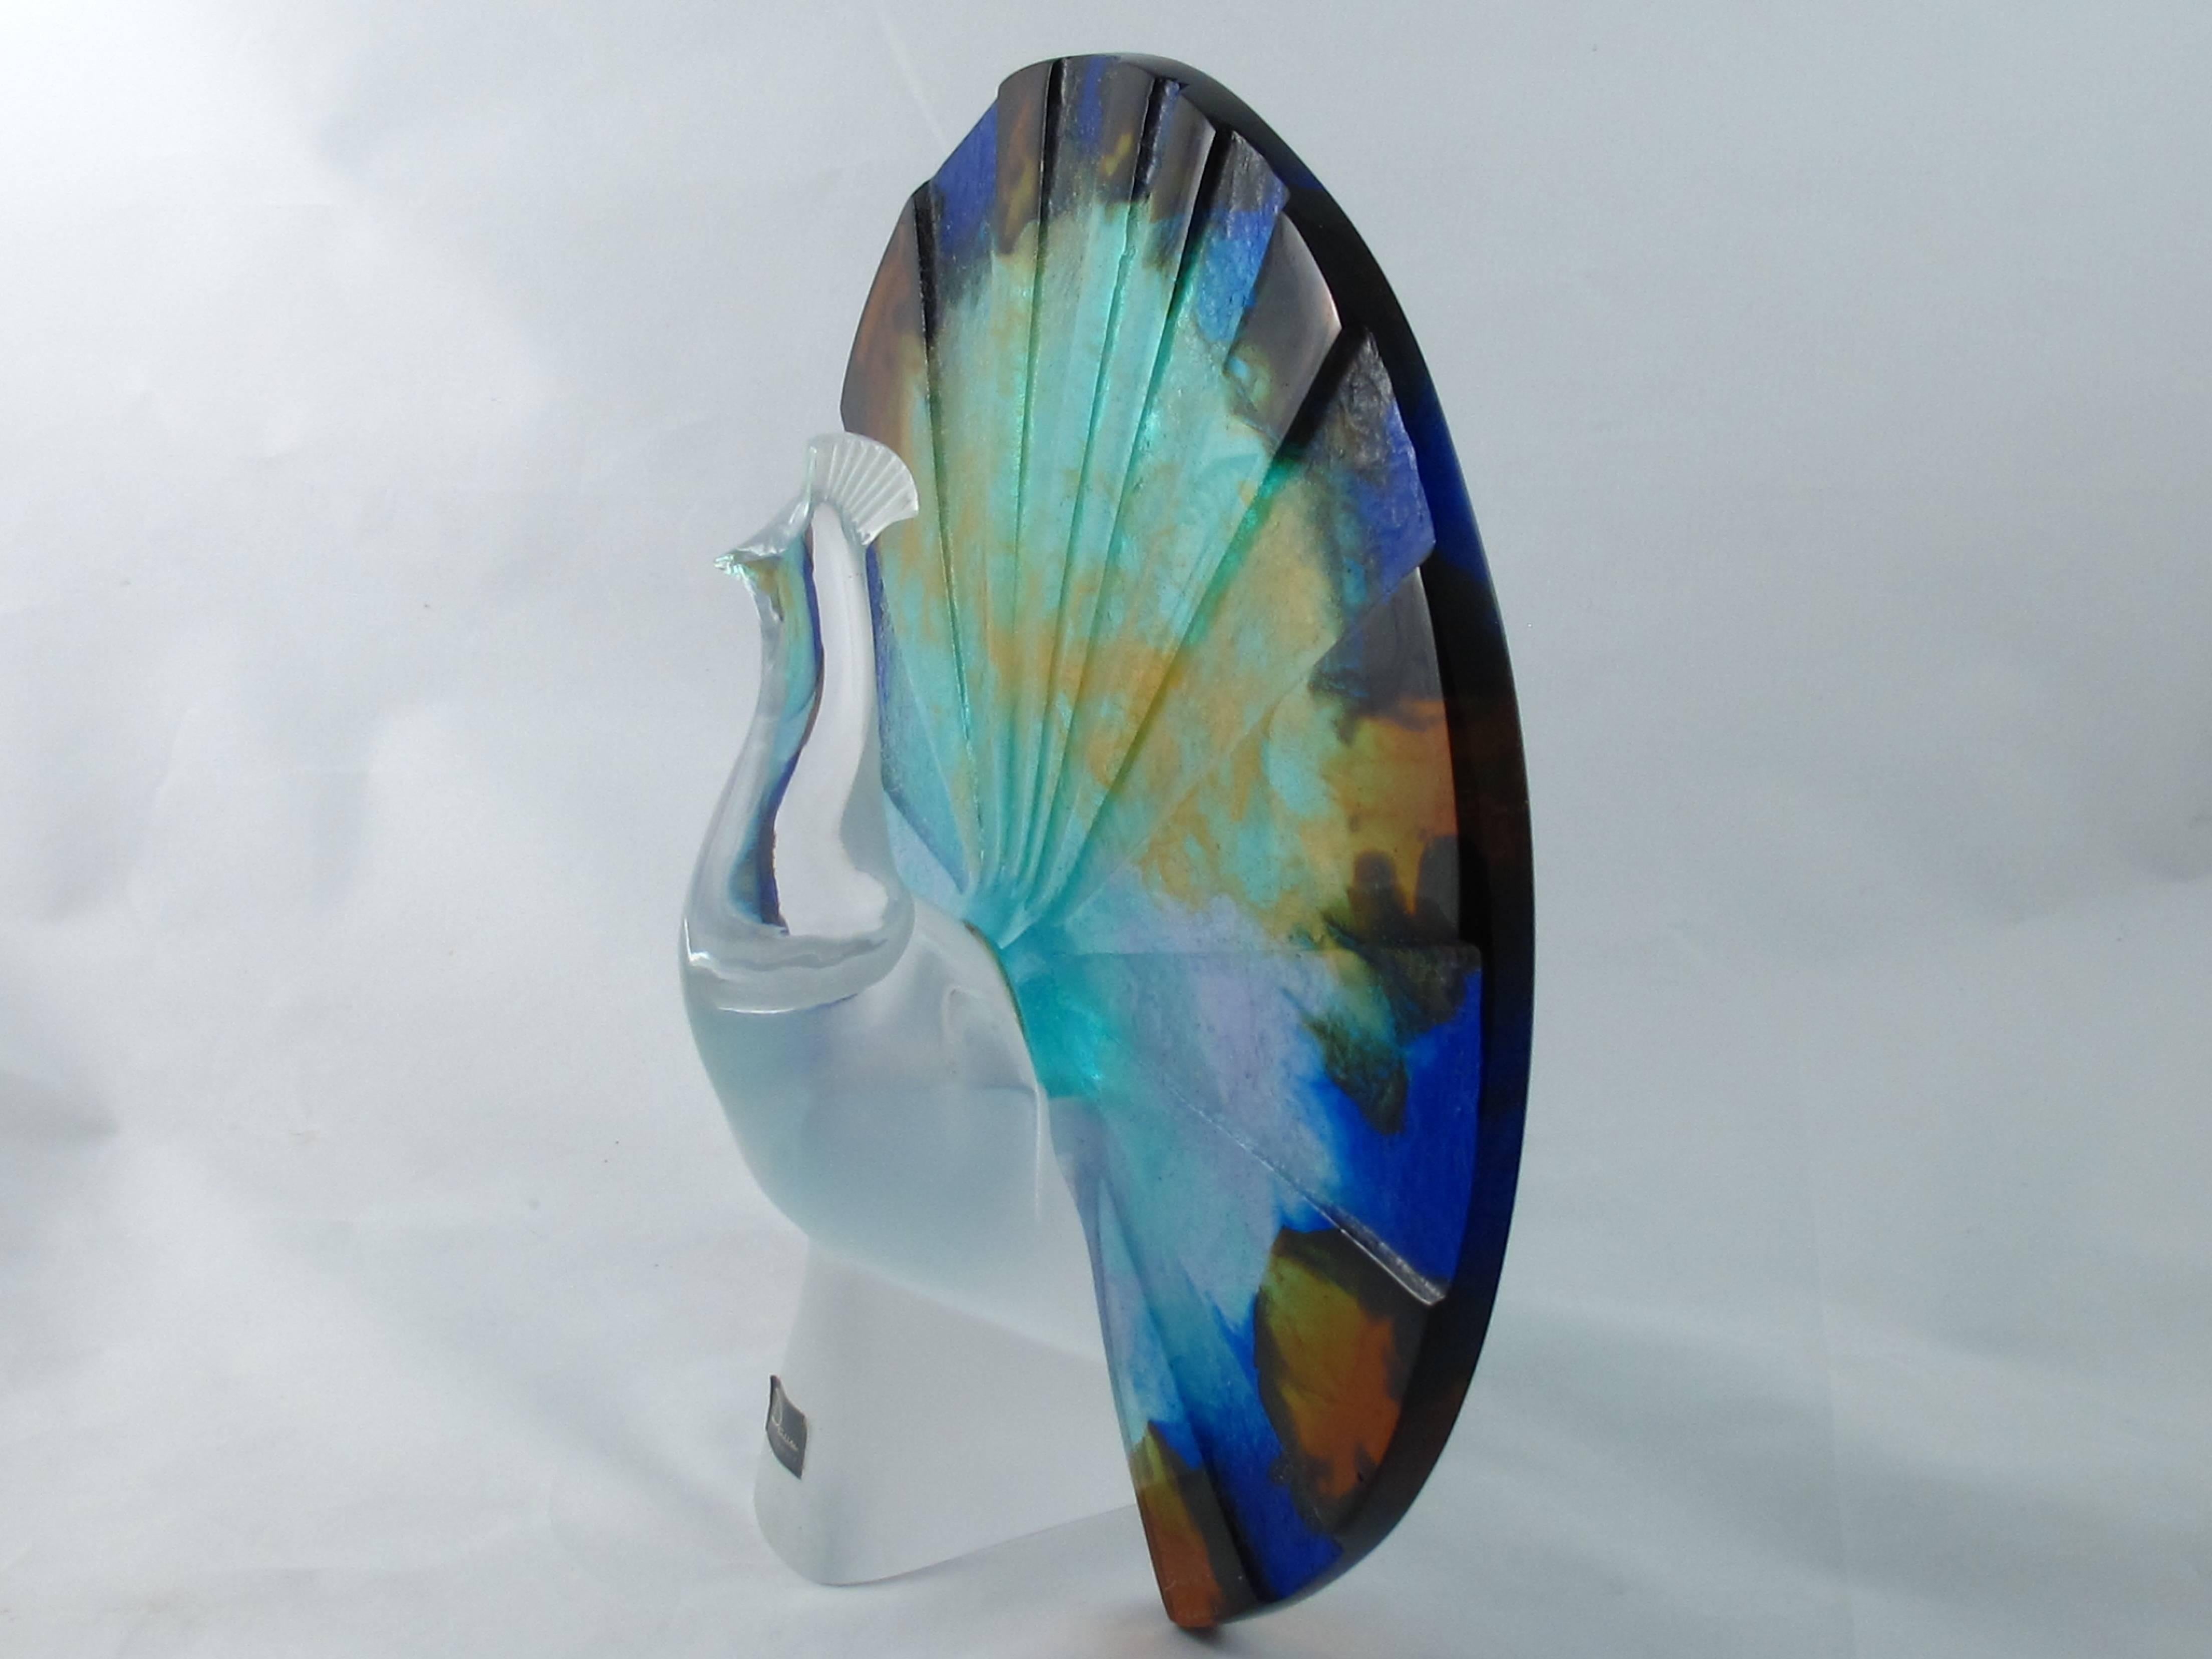 Daum peacock glass sculpture. The feathers made of transparent, etched and multicolored pate-de-verre glass and the body made from clear crystal glass. Designed and made by Daum in France in the 1980s. It is signed Daum France on the lower right. IT